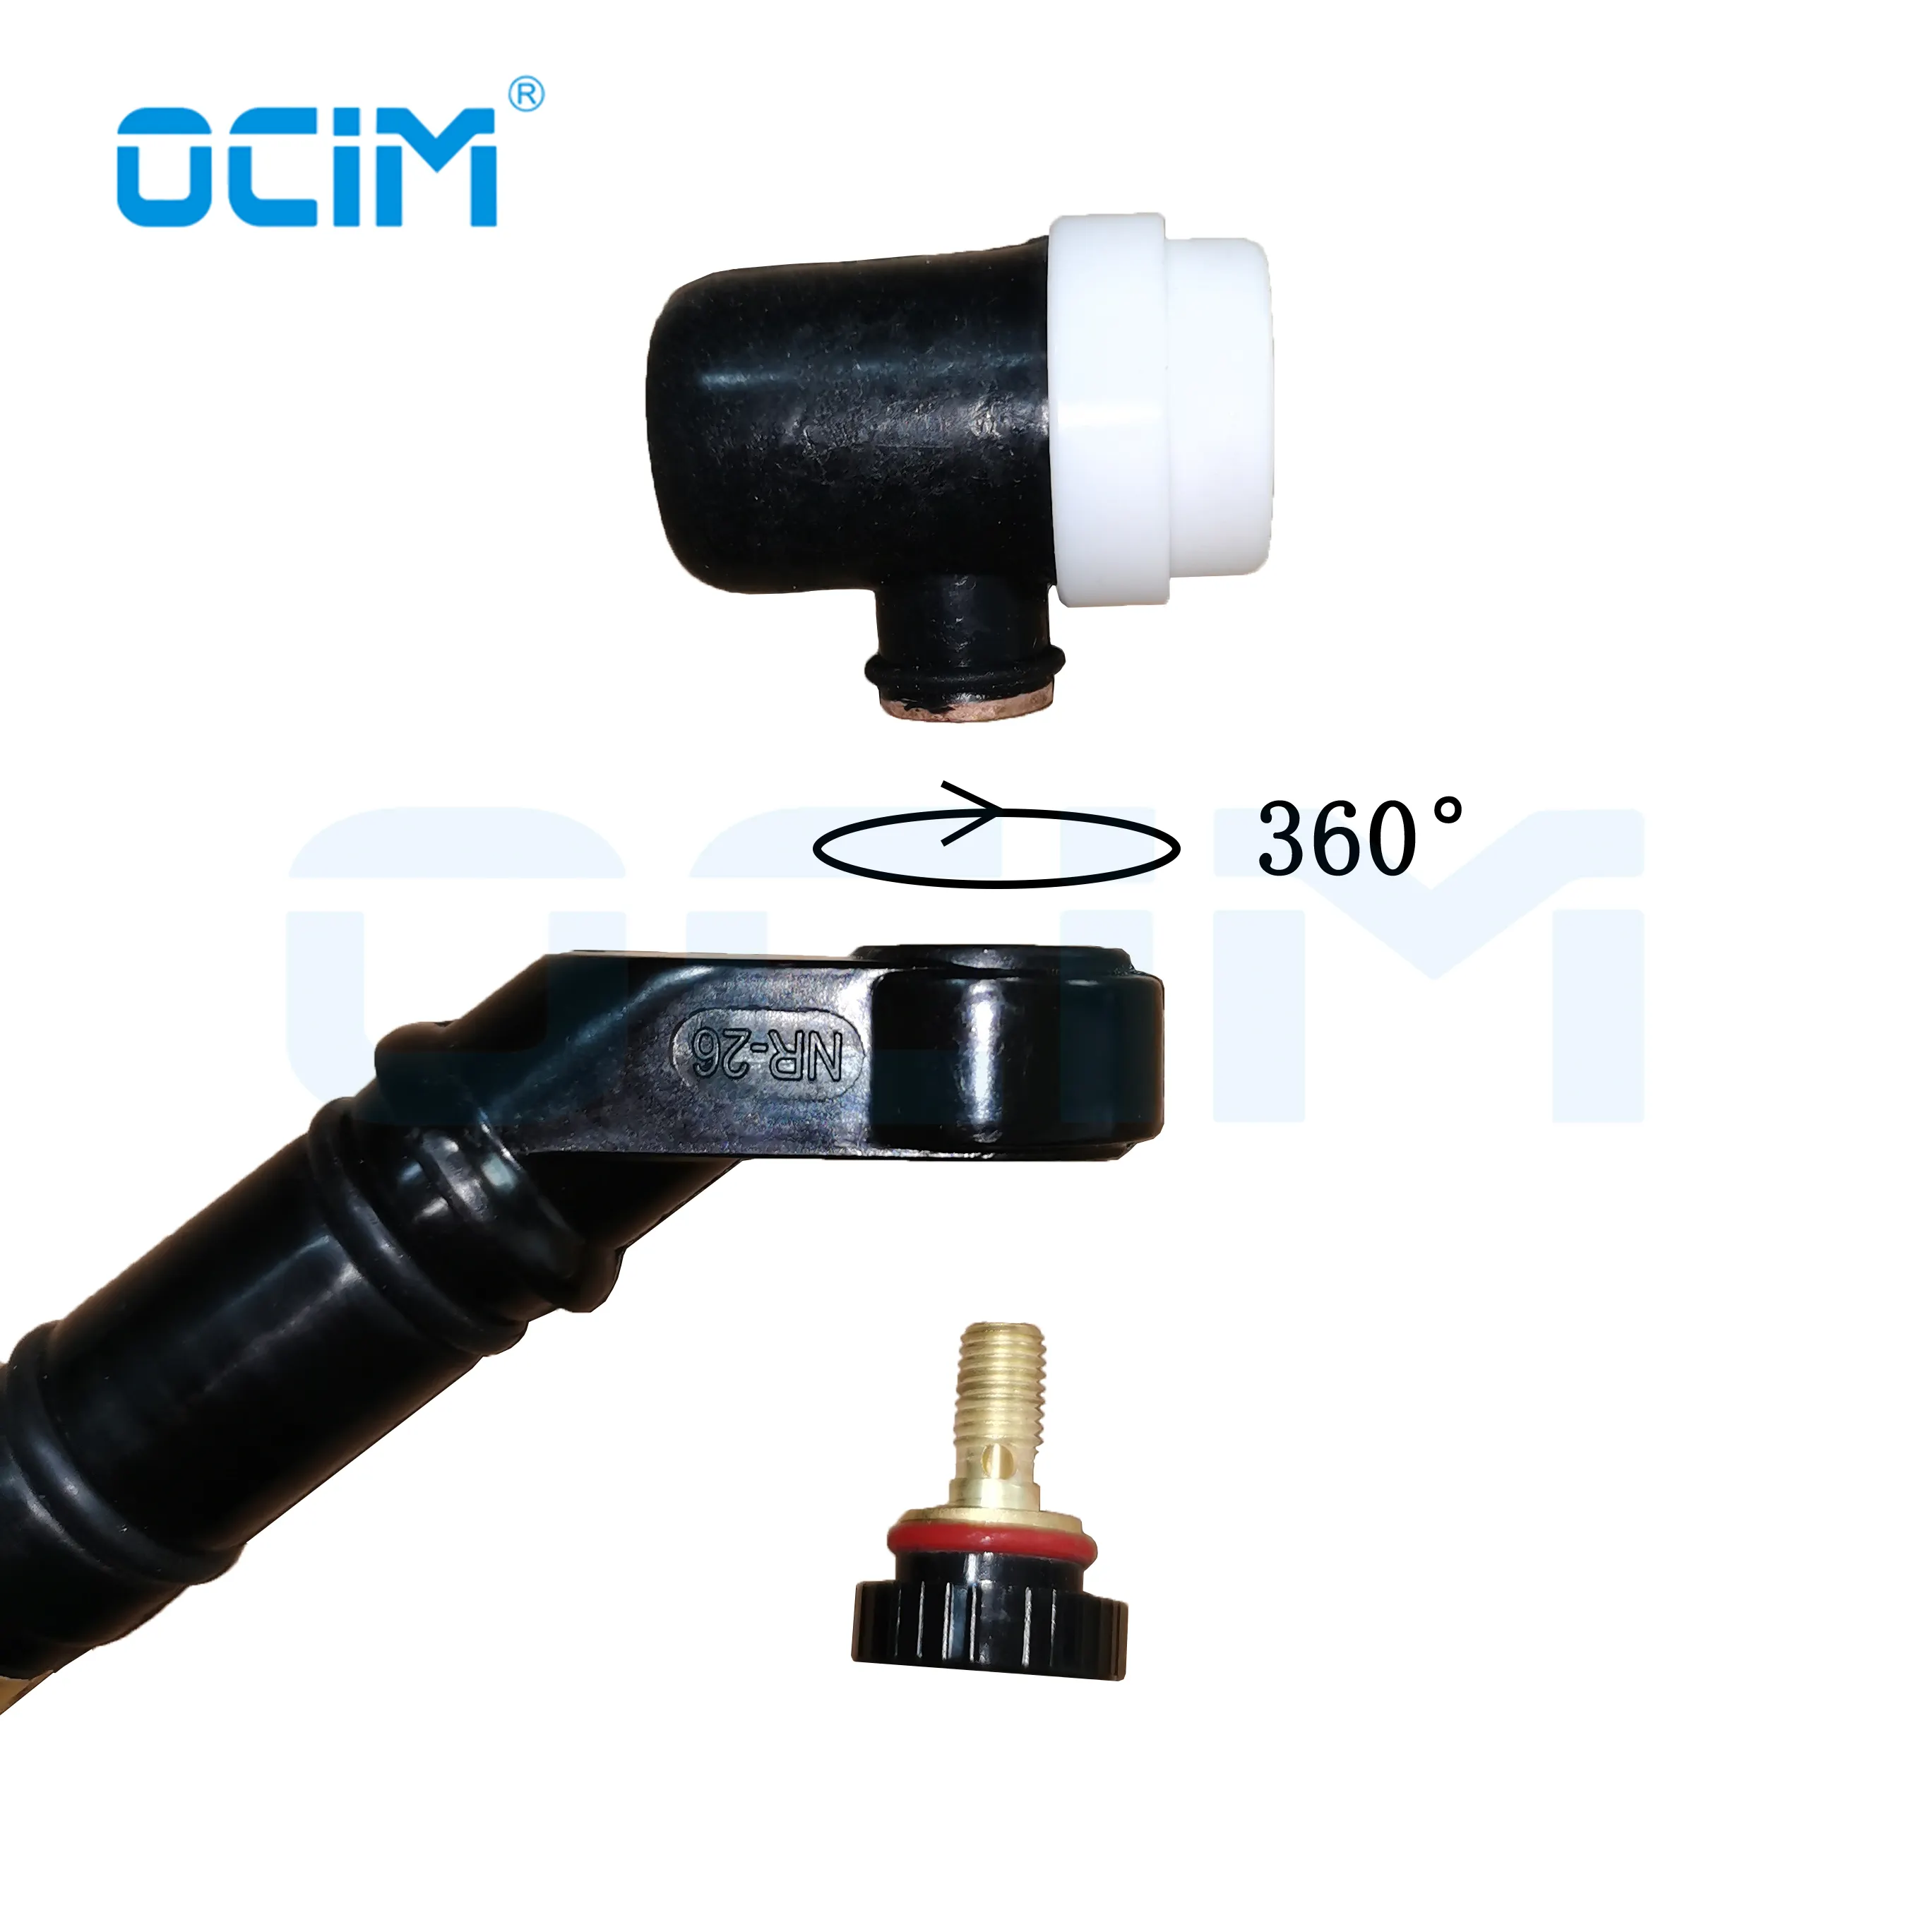 NR26 Tig Head 360 Swivel Rotate Spin NeckHead For WP26 Gss Cooled Argon Arc Welding Torch